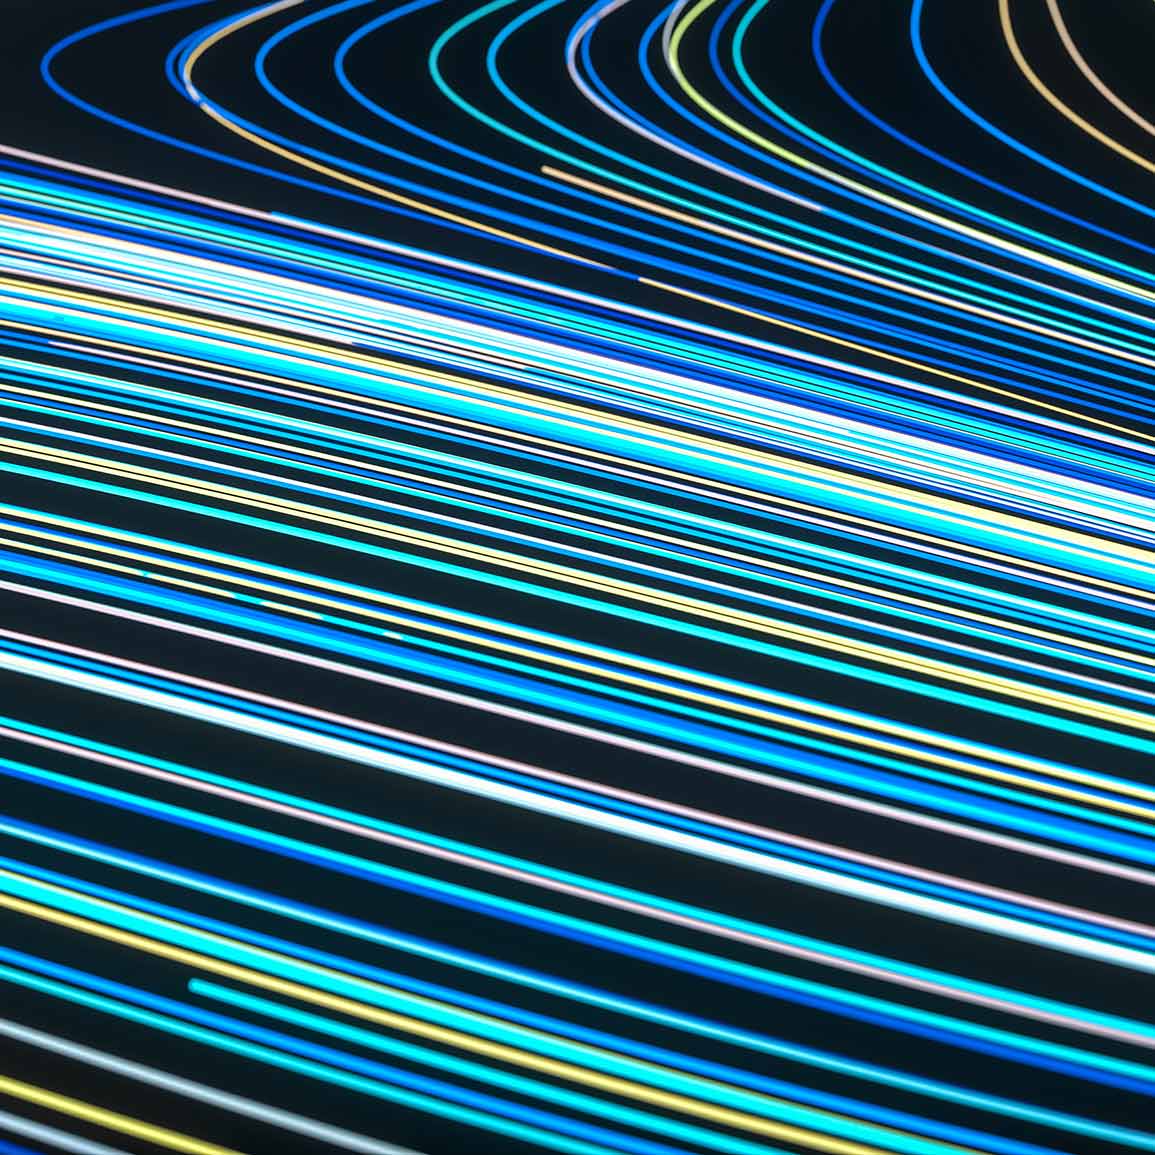 Blue lines moving in the same direction in an abstract representation of technology